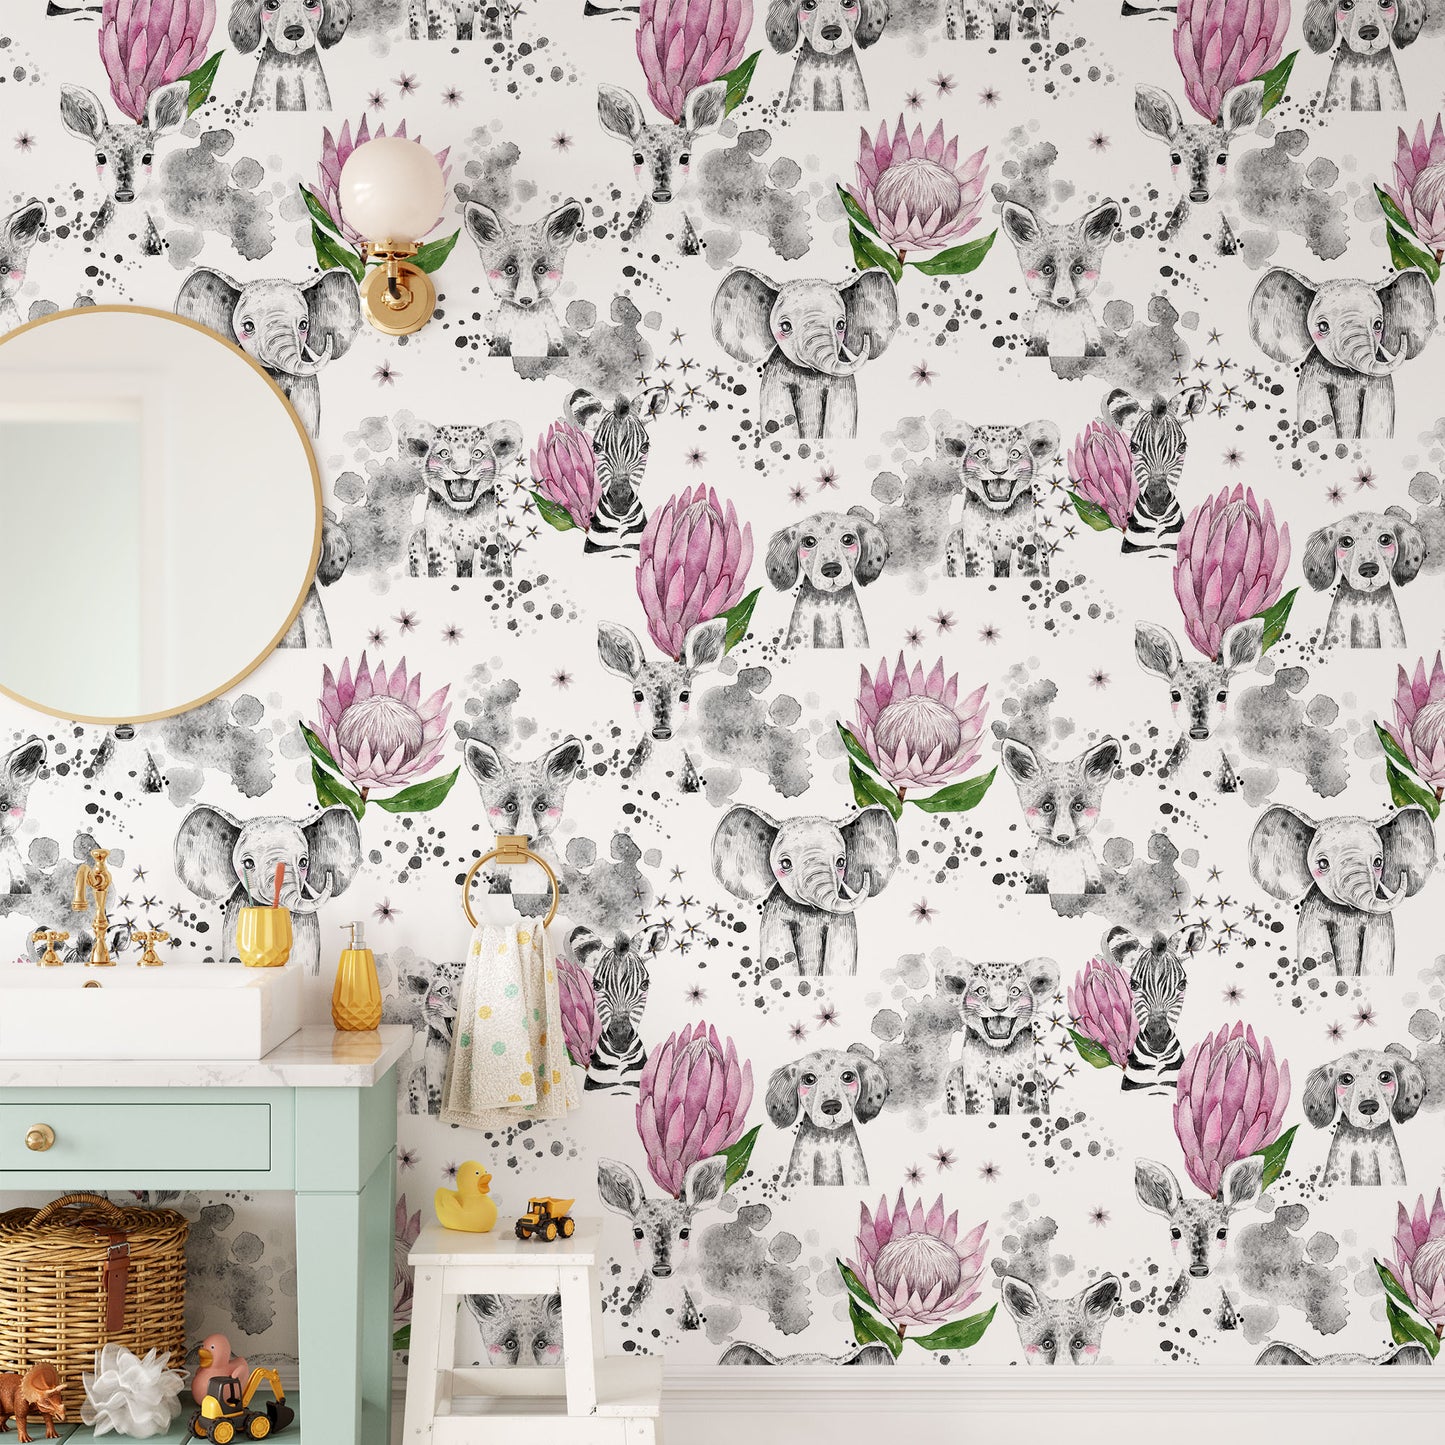 Pink flower friends cute elephant, dog, cheetah and fox animal print with pink/rose flowers on white background easy to install and remove peel and stick custom wallpaper available in different lengths/sizes locally created and printed in Canada Artichoke wallpaper. Washable, durable, commercial grade, removable and waterproof.